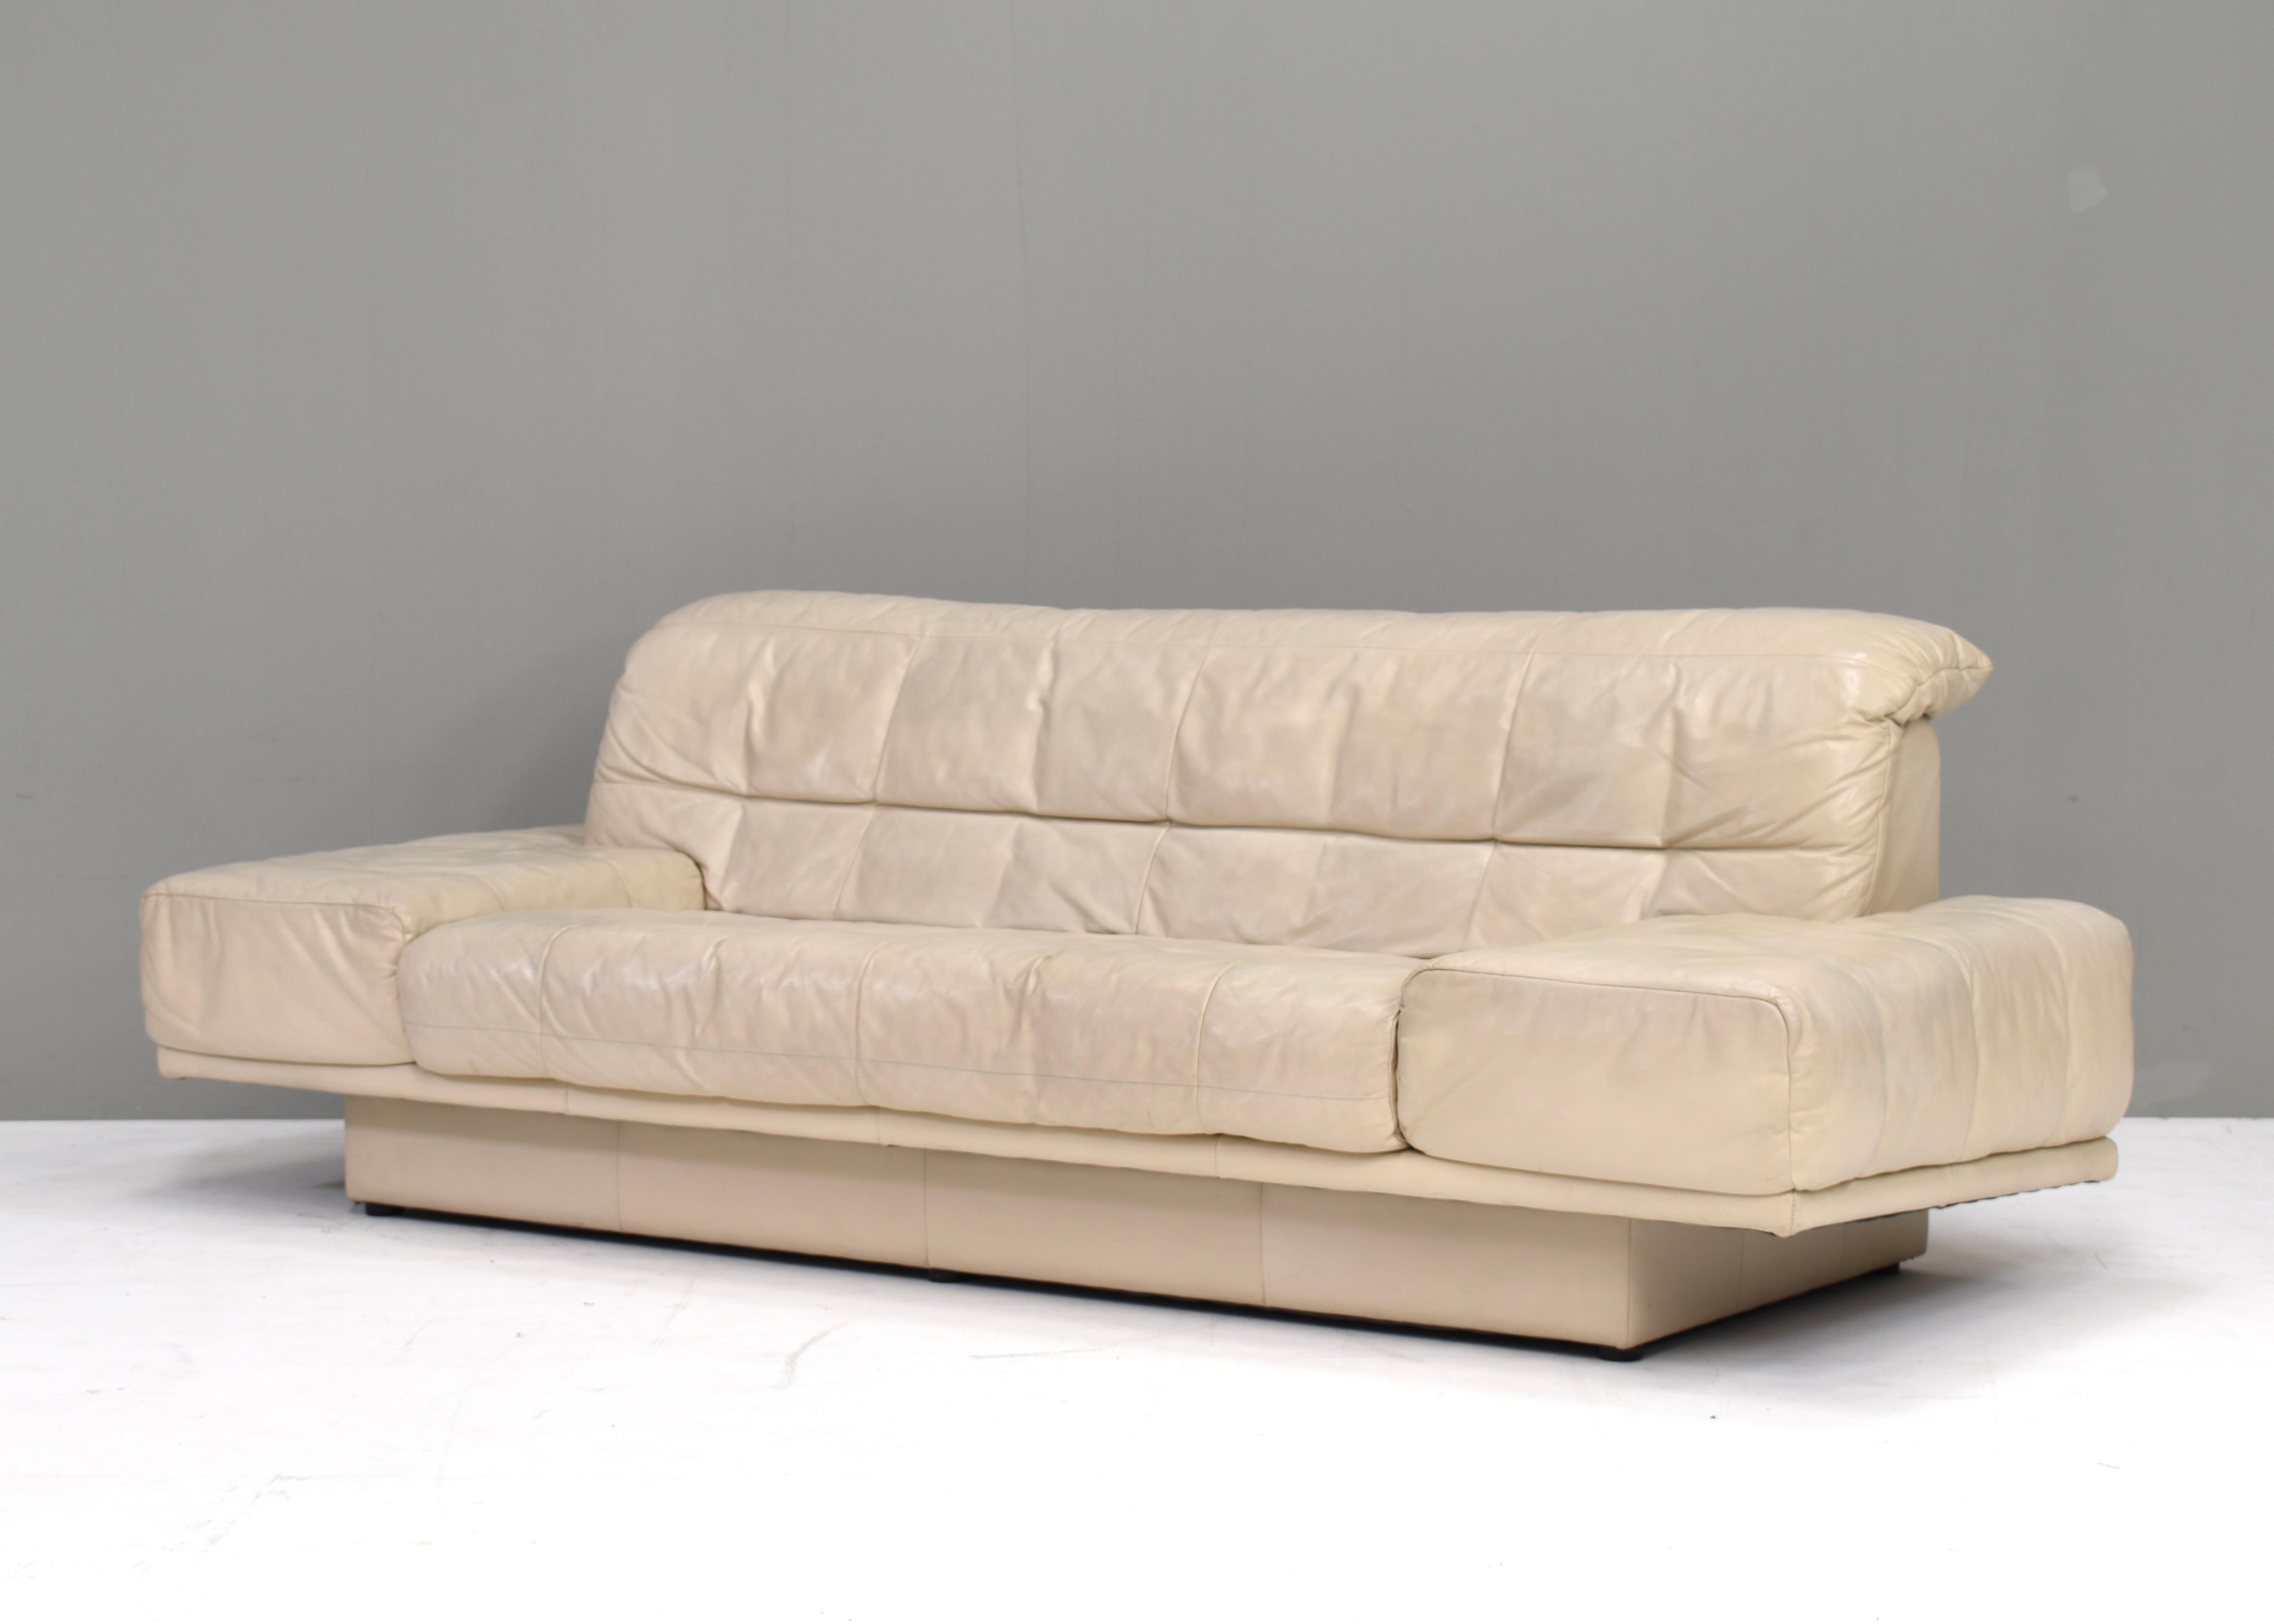 Late 20th Century Pair of Rolf Benz sofa’s 2-seat and 3-seat – Germany, circa 1980-1990 For Sale